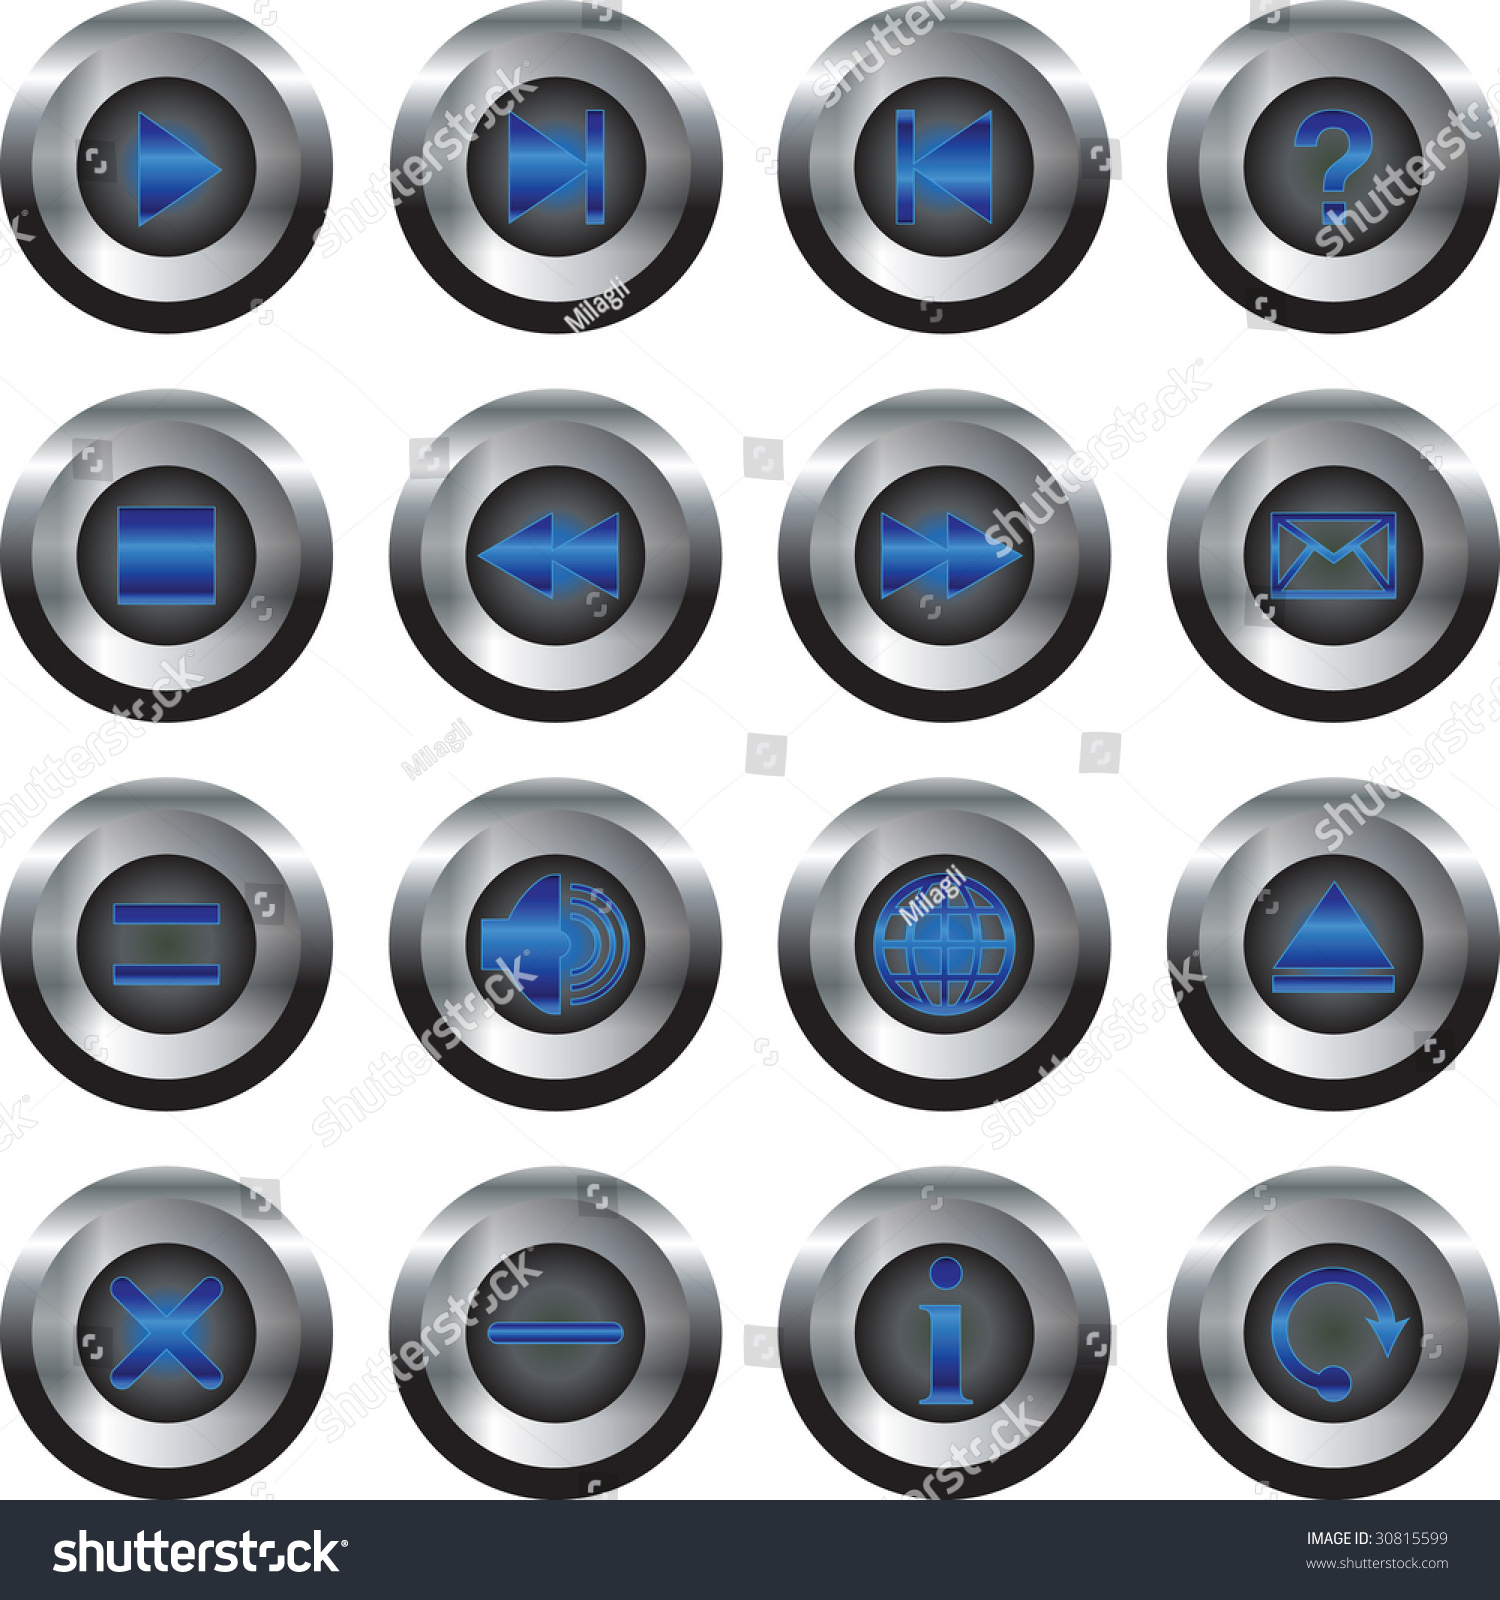 Button, Blue, Play, Stop, Pause Stock Vector Illustration 30815599